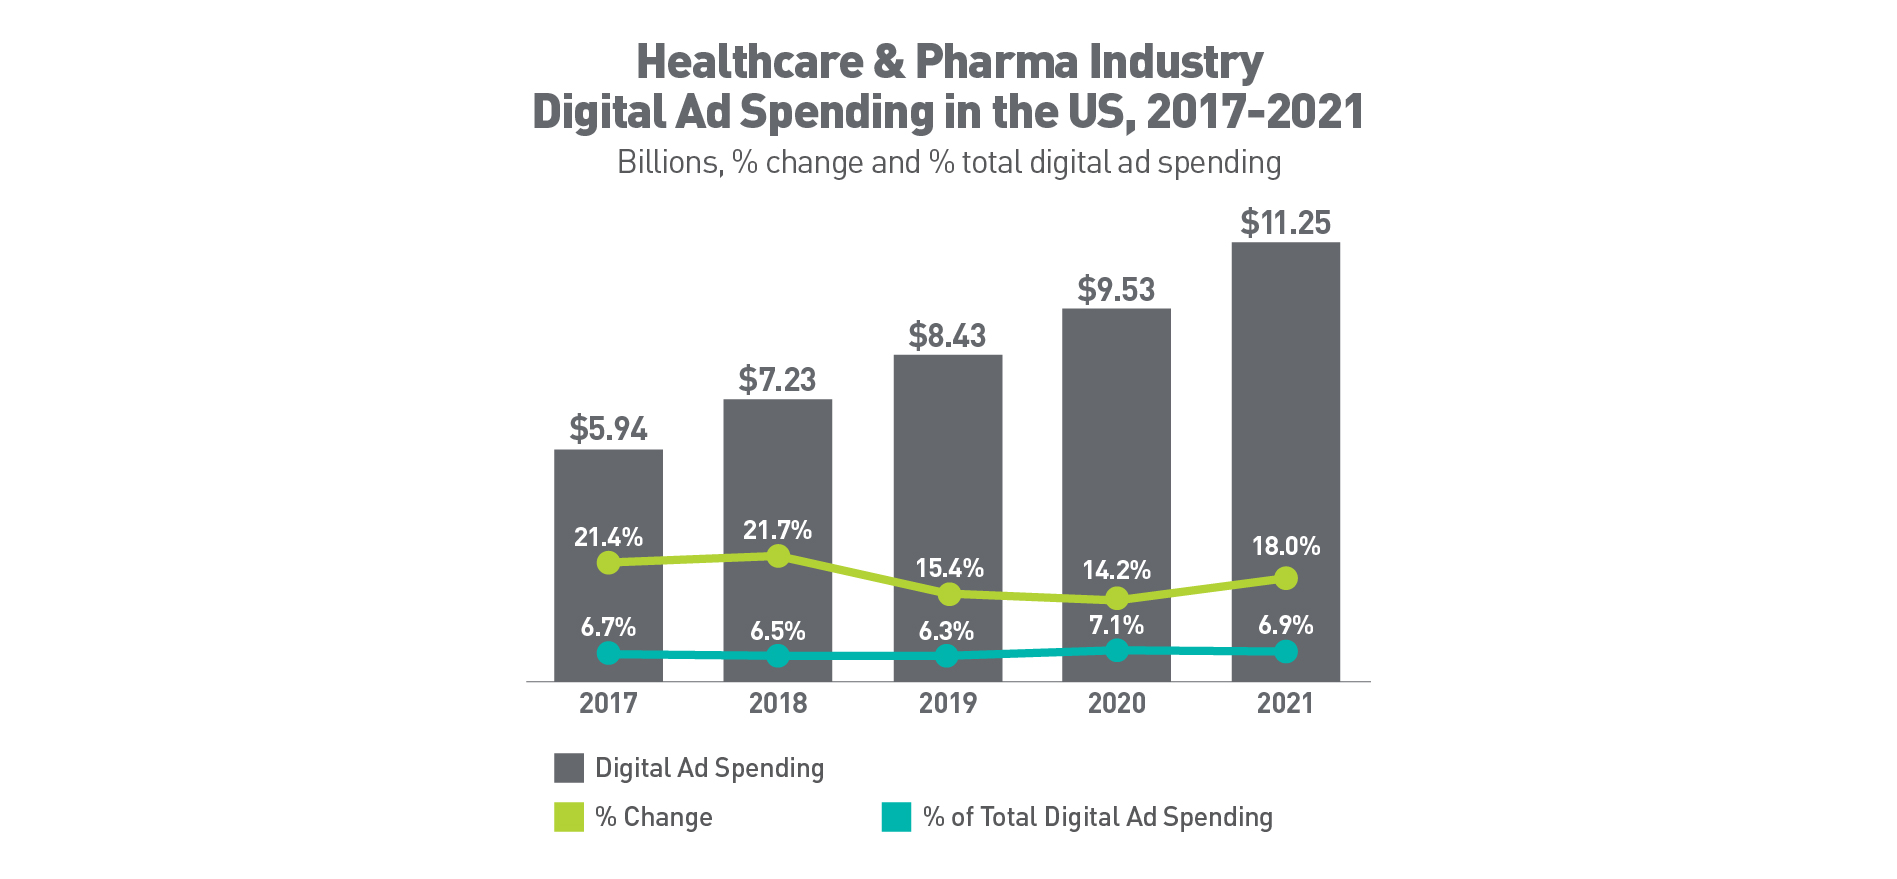 Health Care and Pharma Digital Ad Spending in the US, 2017-2021